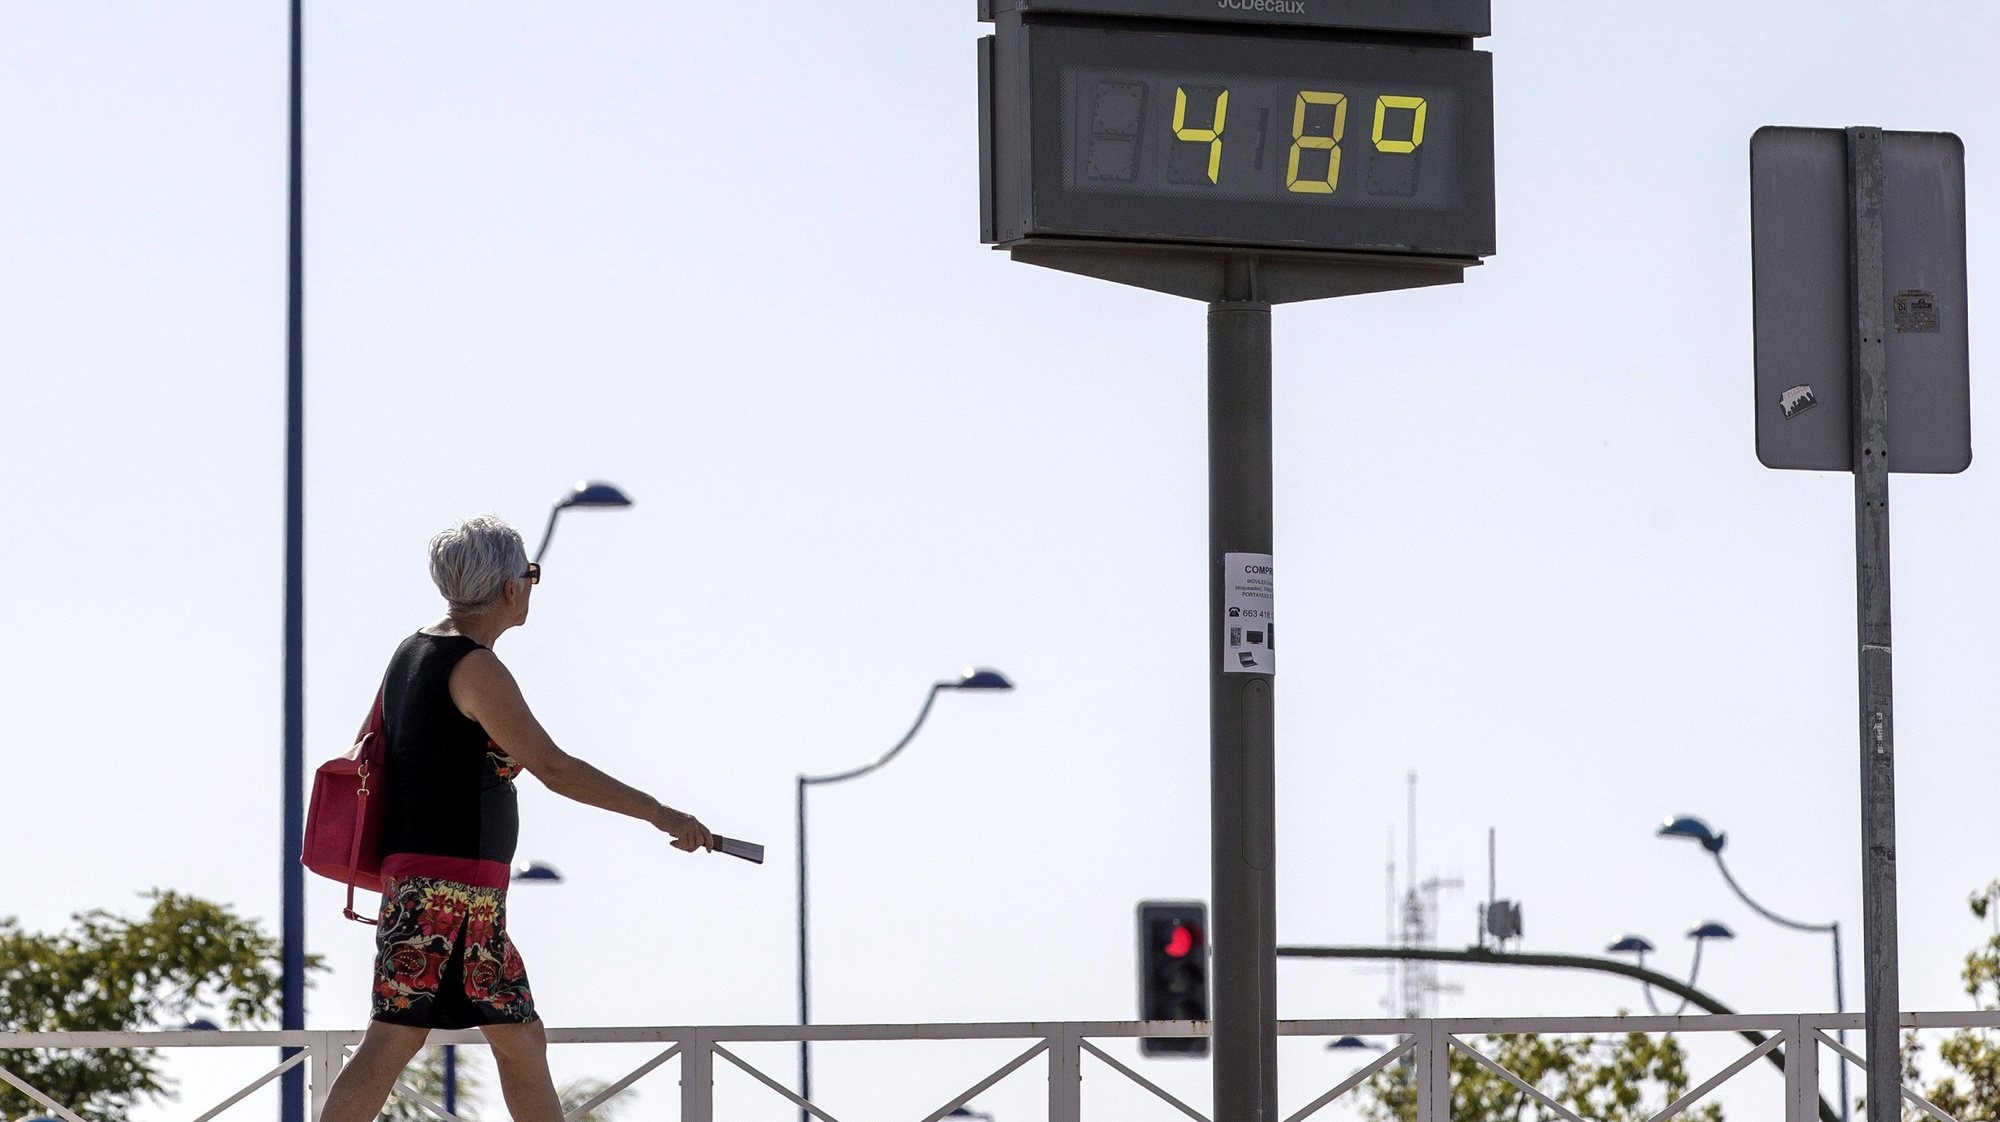 epa06035845 A woman with a fan walks next to a thermometer that marks 48 degrees in Sevilla, Spain, 18 June 2017. Spain is under a heat wave with higher than normal in this time of year temperatures.  EPA/JULIO MUNOZ